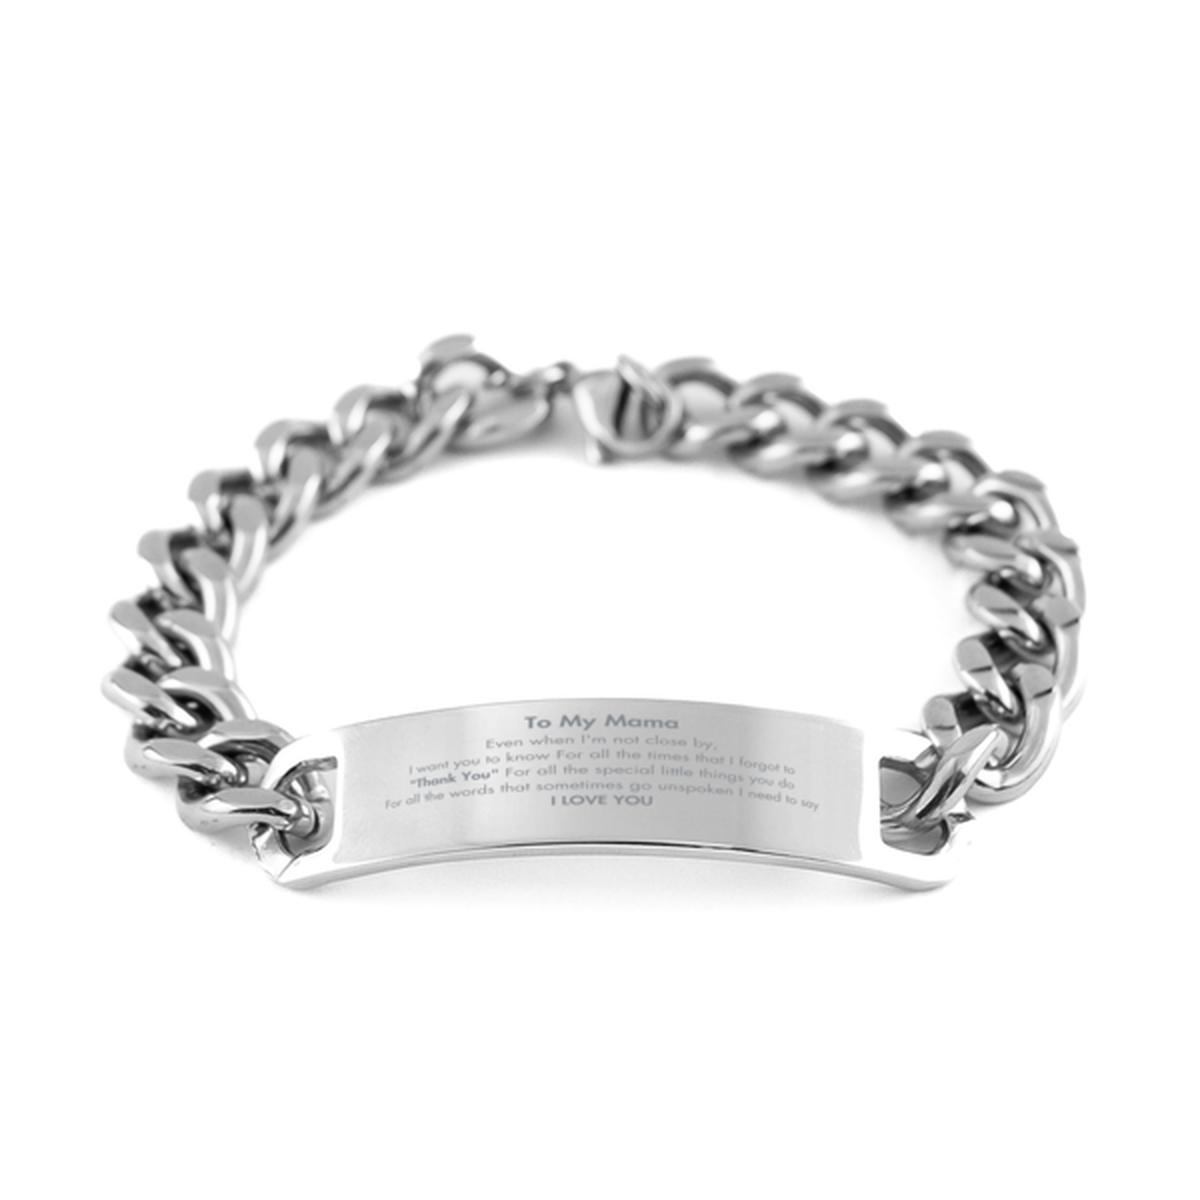 Thank You Gifts for Mama, Keepsake Cuban Chain Stainless Steel Bracelet Gifts for Mama Birthday Mother's day Father's Day Mama For all the words That sometimes go unspoken I need to say I LOVE YOU